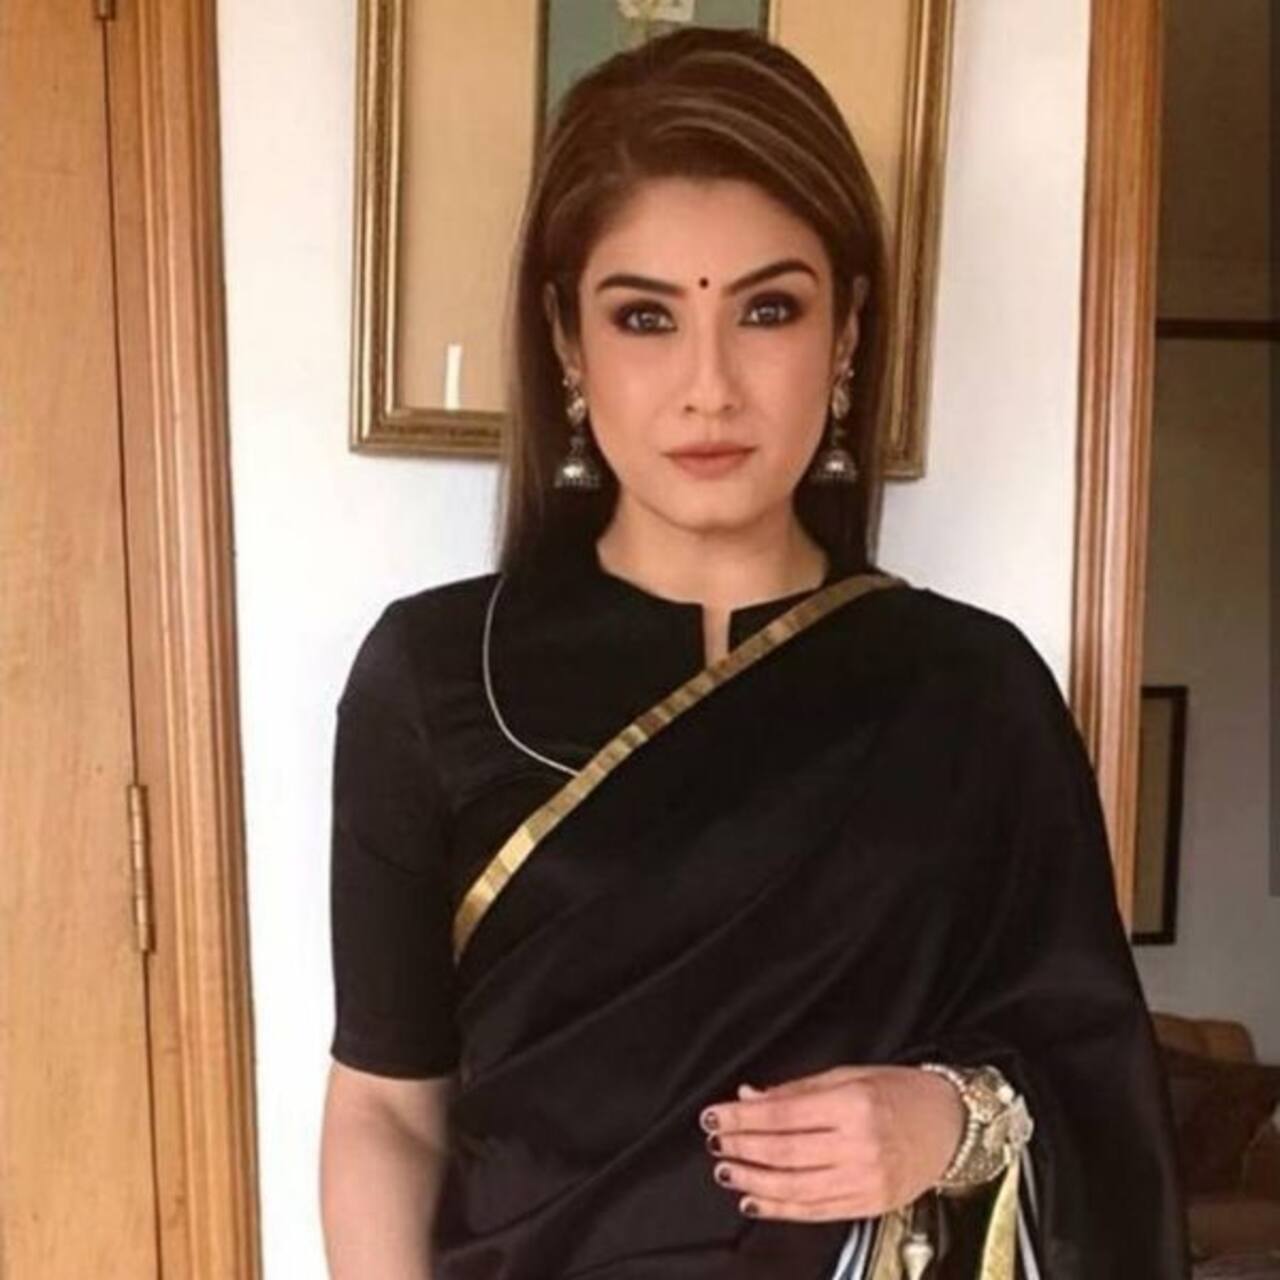 KGF Chapter 2: Raveena Tandon to play THIS role in the Yash-starrer? Here's what we know